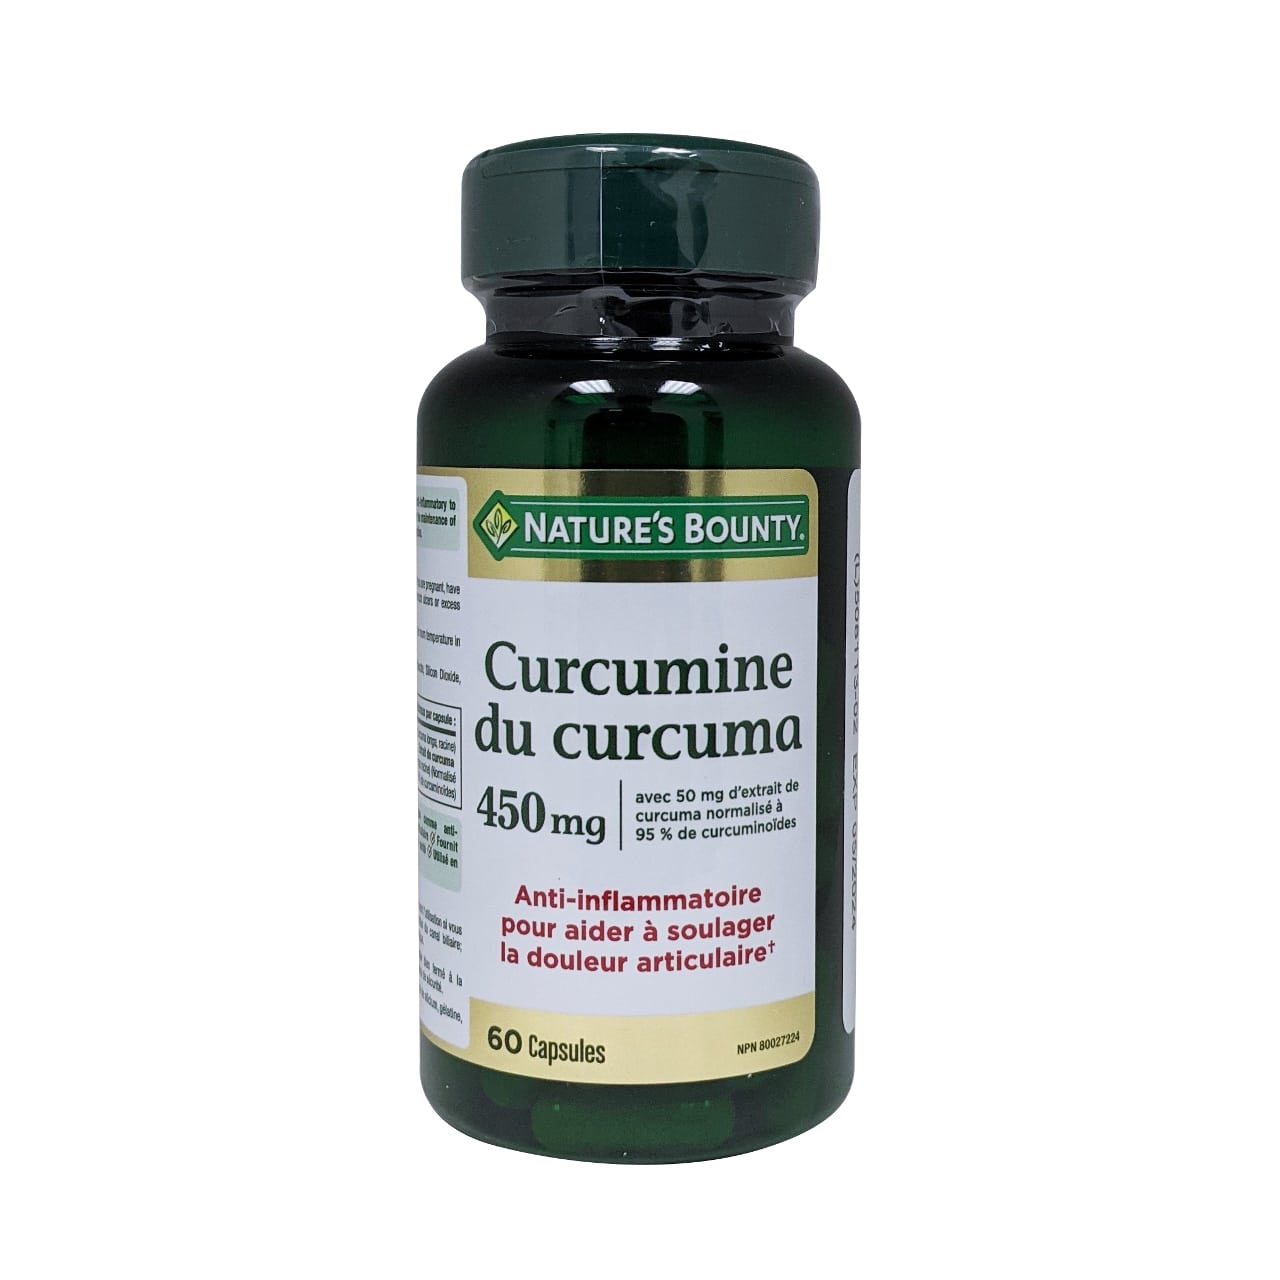 Product label for Nature's Bounty Turmeric Circumin 450mg in French